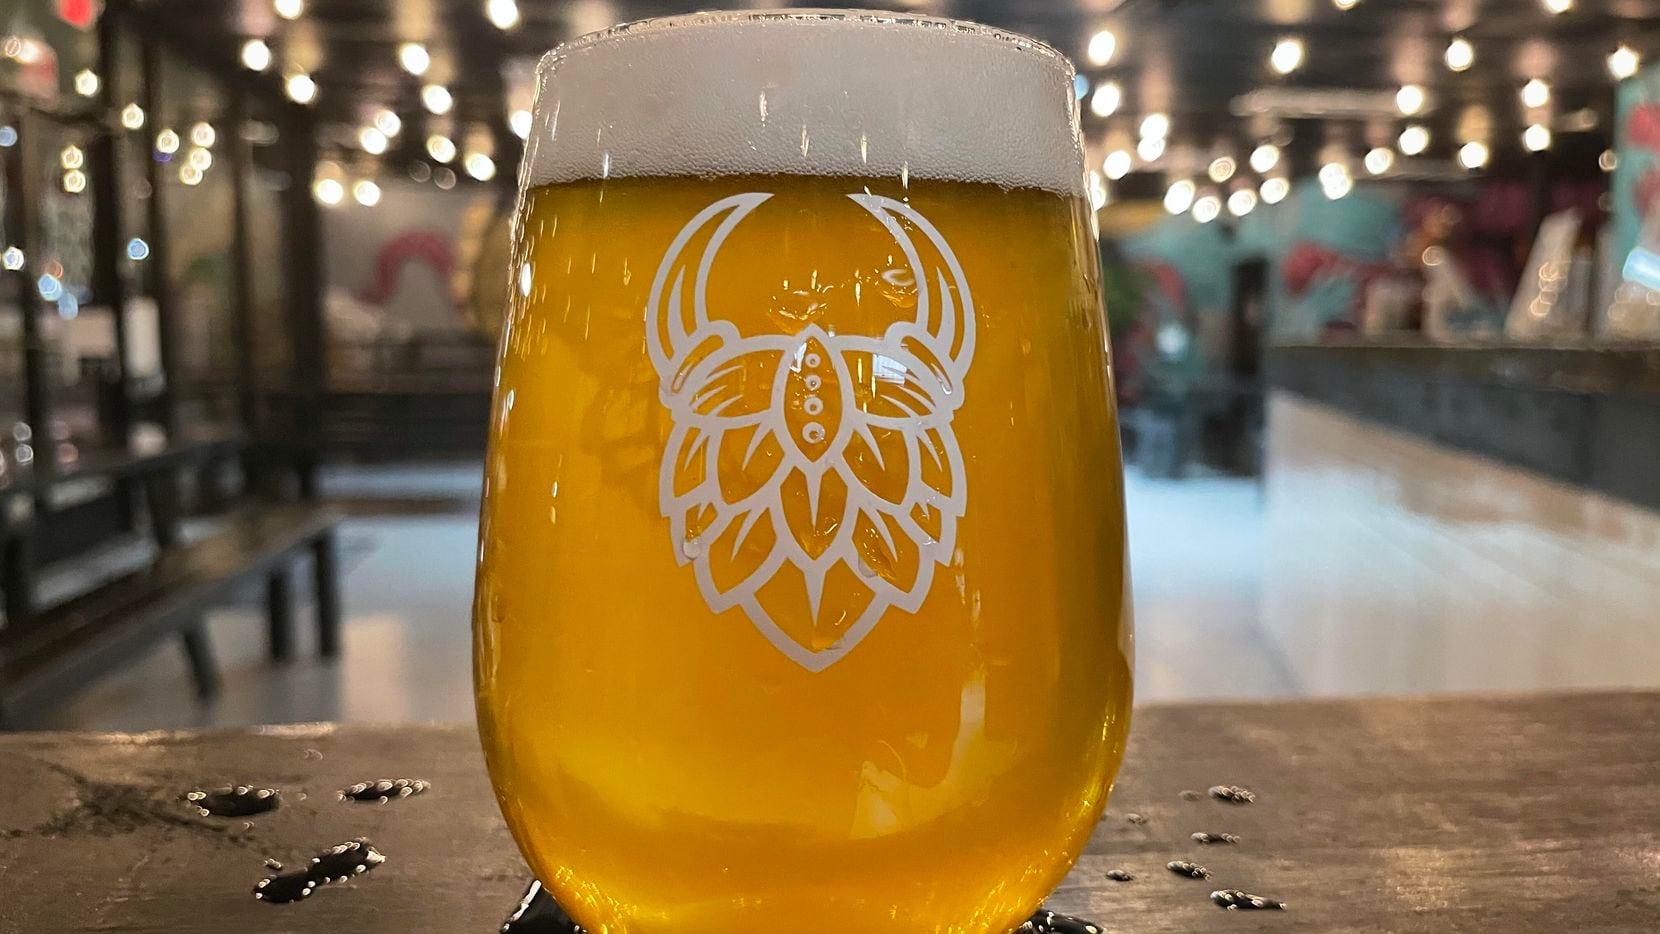 Brutal Beerworks in North Richland Hills brewed a new golden ale specifically for Goldee's...